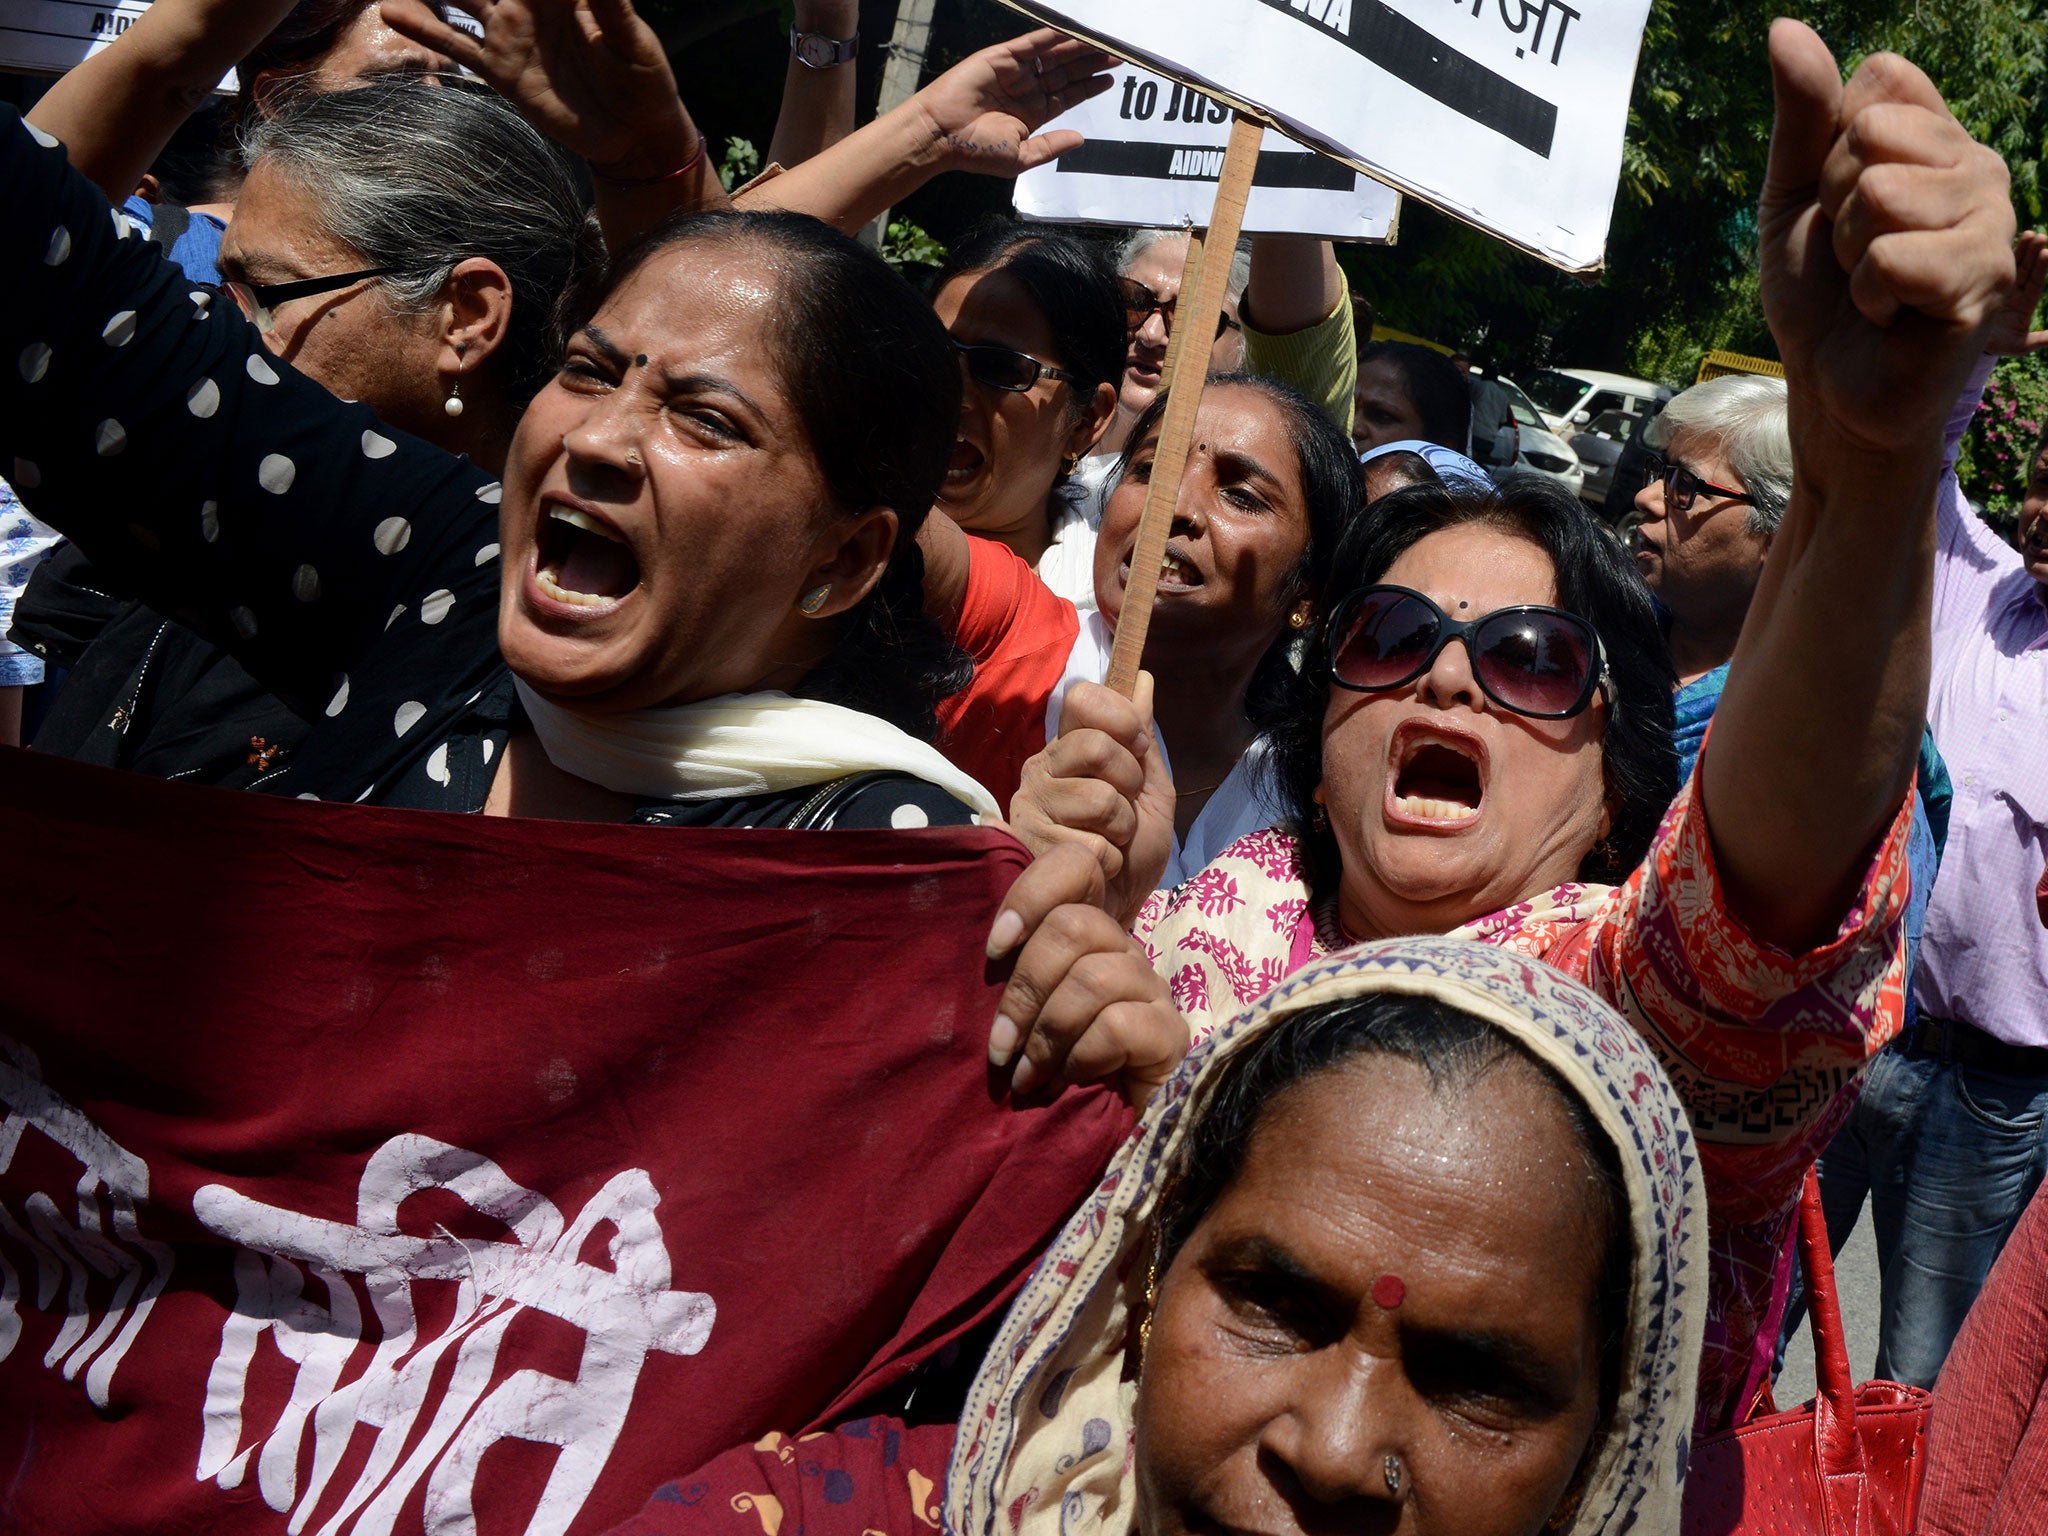 Indian women shout slogans during a protest over claims a Saudi official raped his two maids, near the Saudi Arabian embassy in New Delhi, on 10 September, 2015